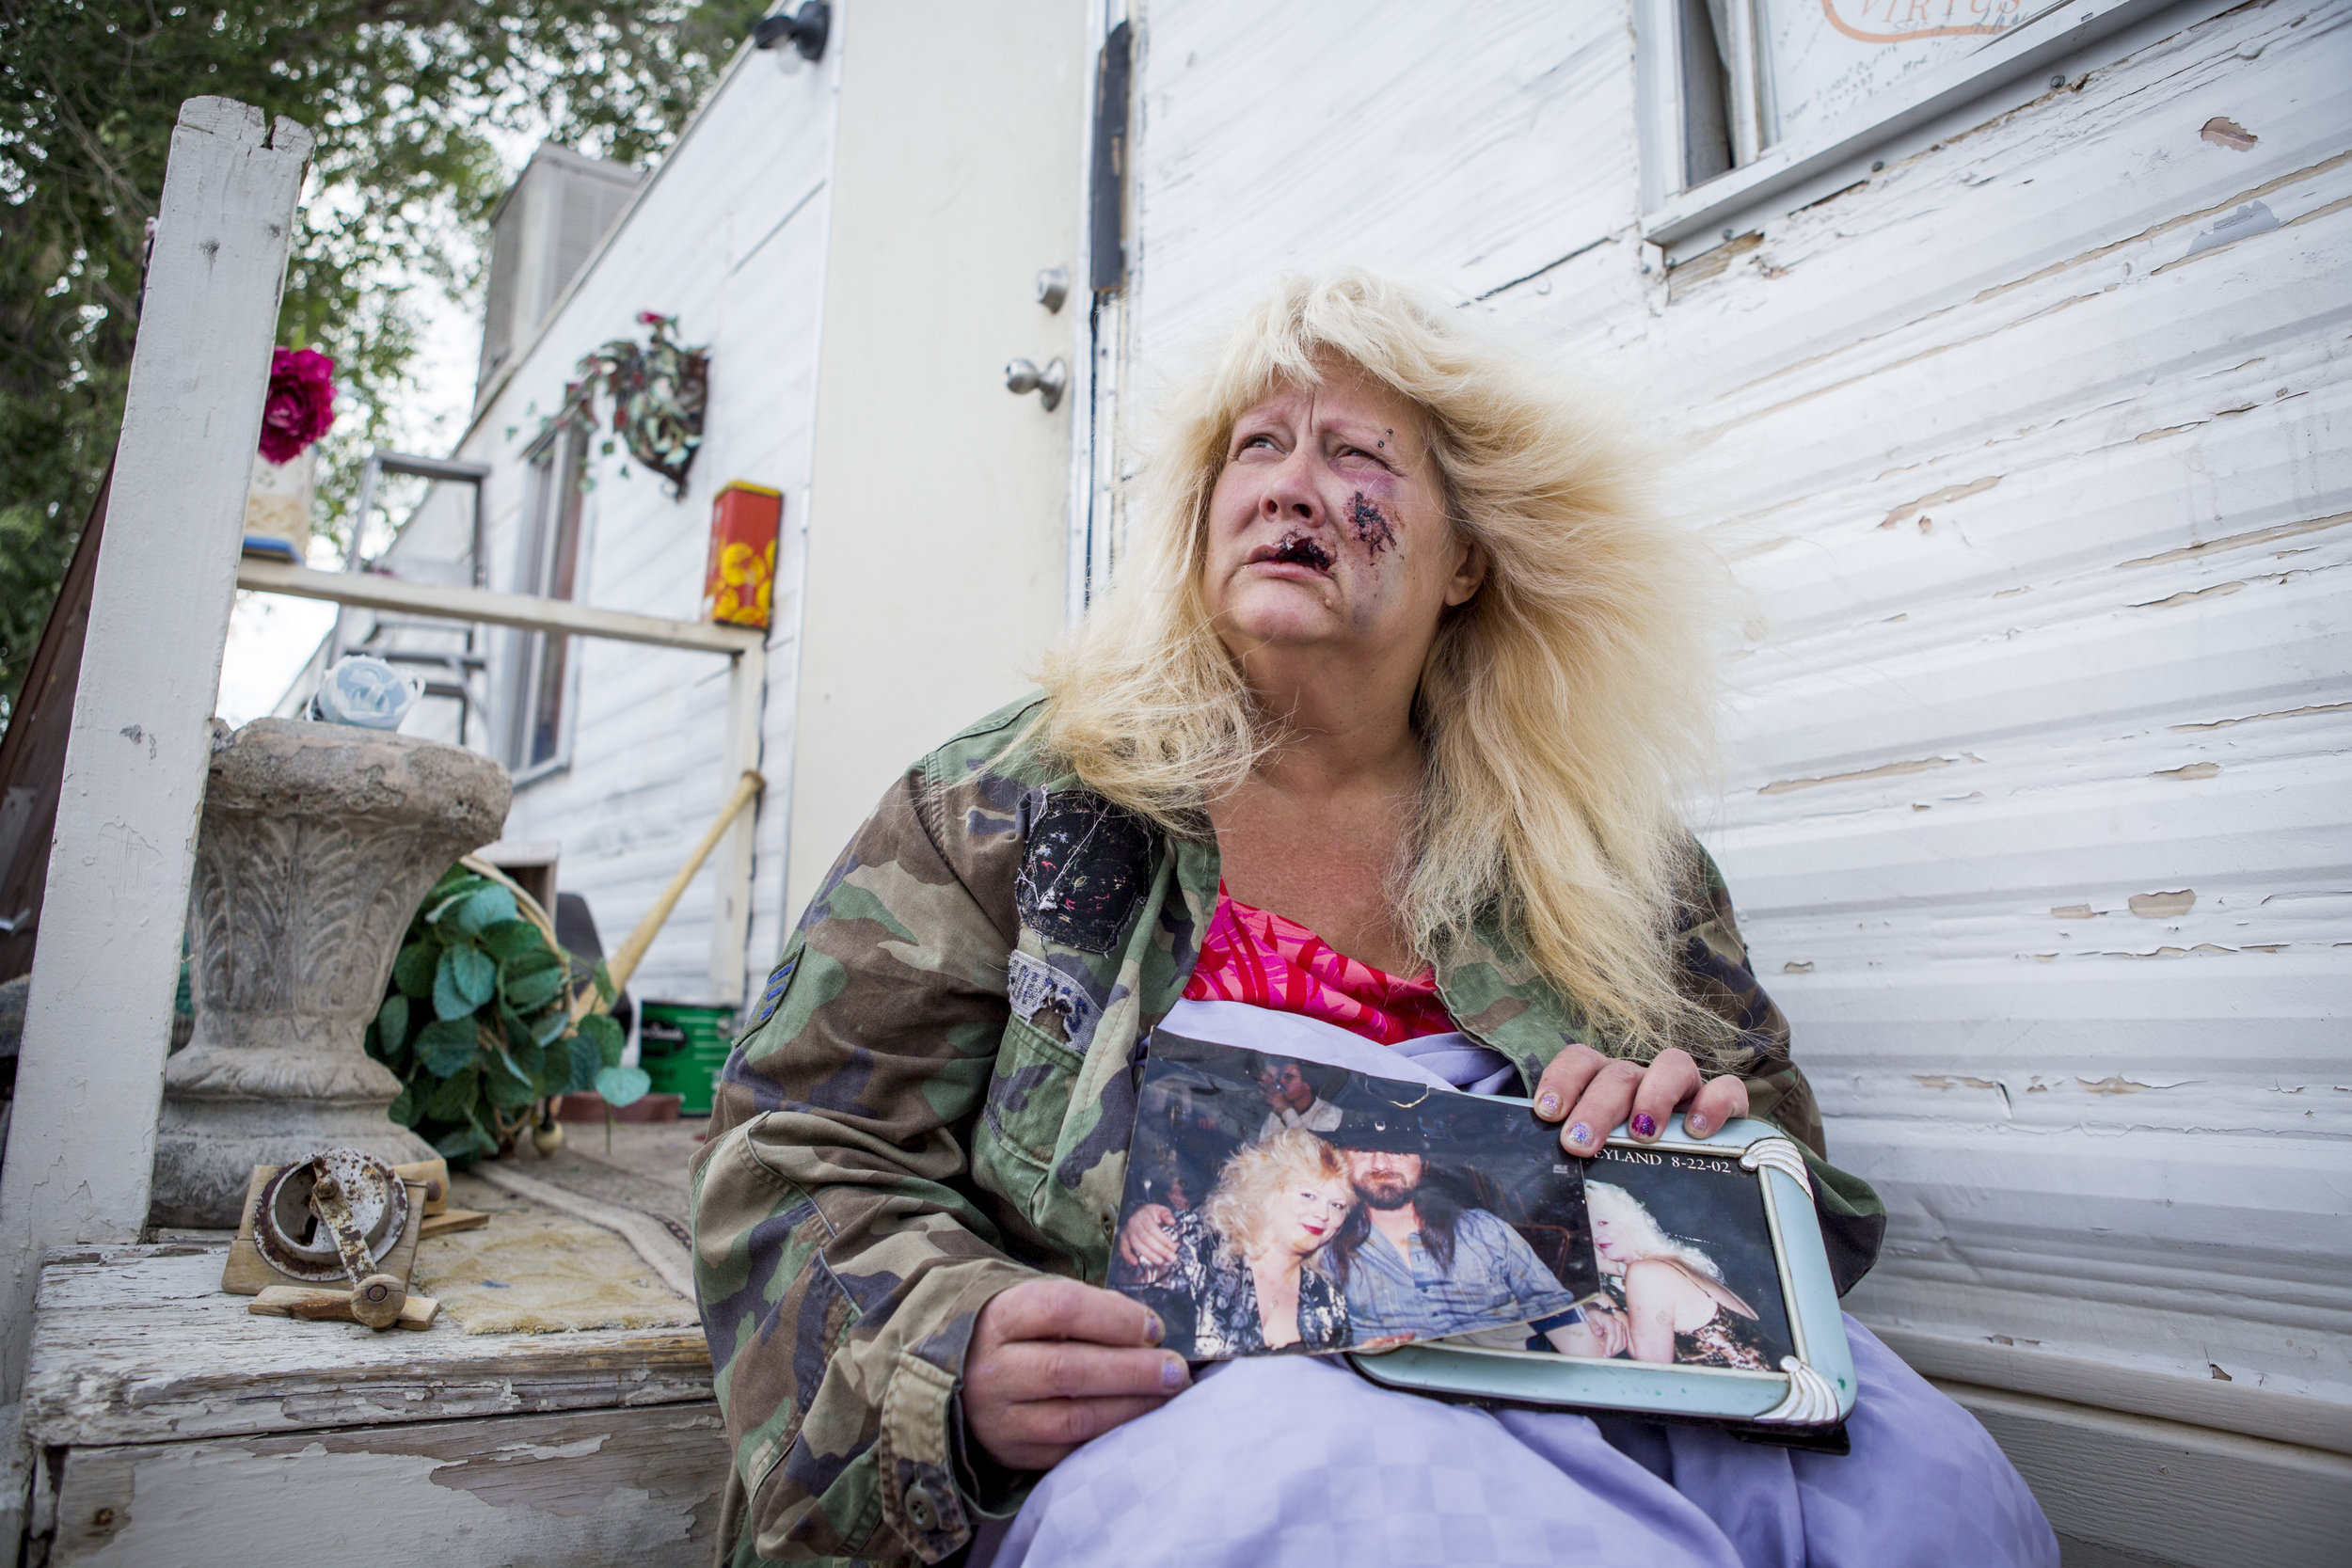  Joan Hobbs, 53, holds photos of herself outside of her home before she was bitten by a dog in northeast Las Vegas Tuesday, May 9, 2017.&nbsp;"I didn't used to be ugly," she said. "Now I am, and it's not my fault." 